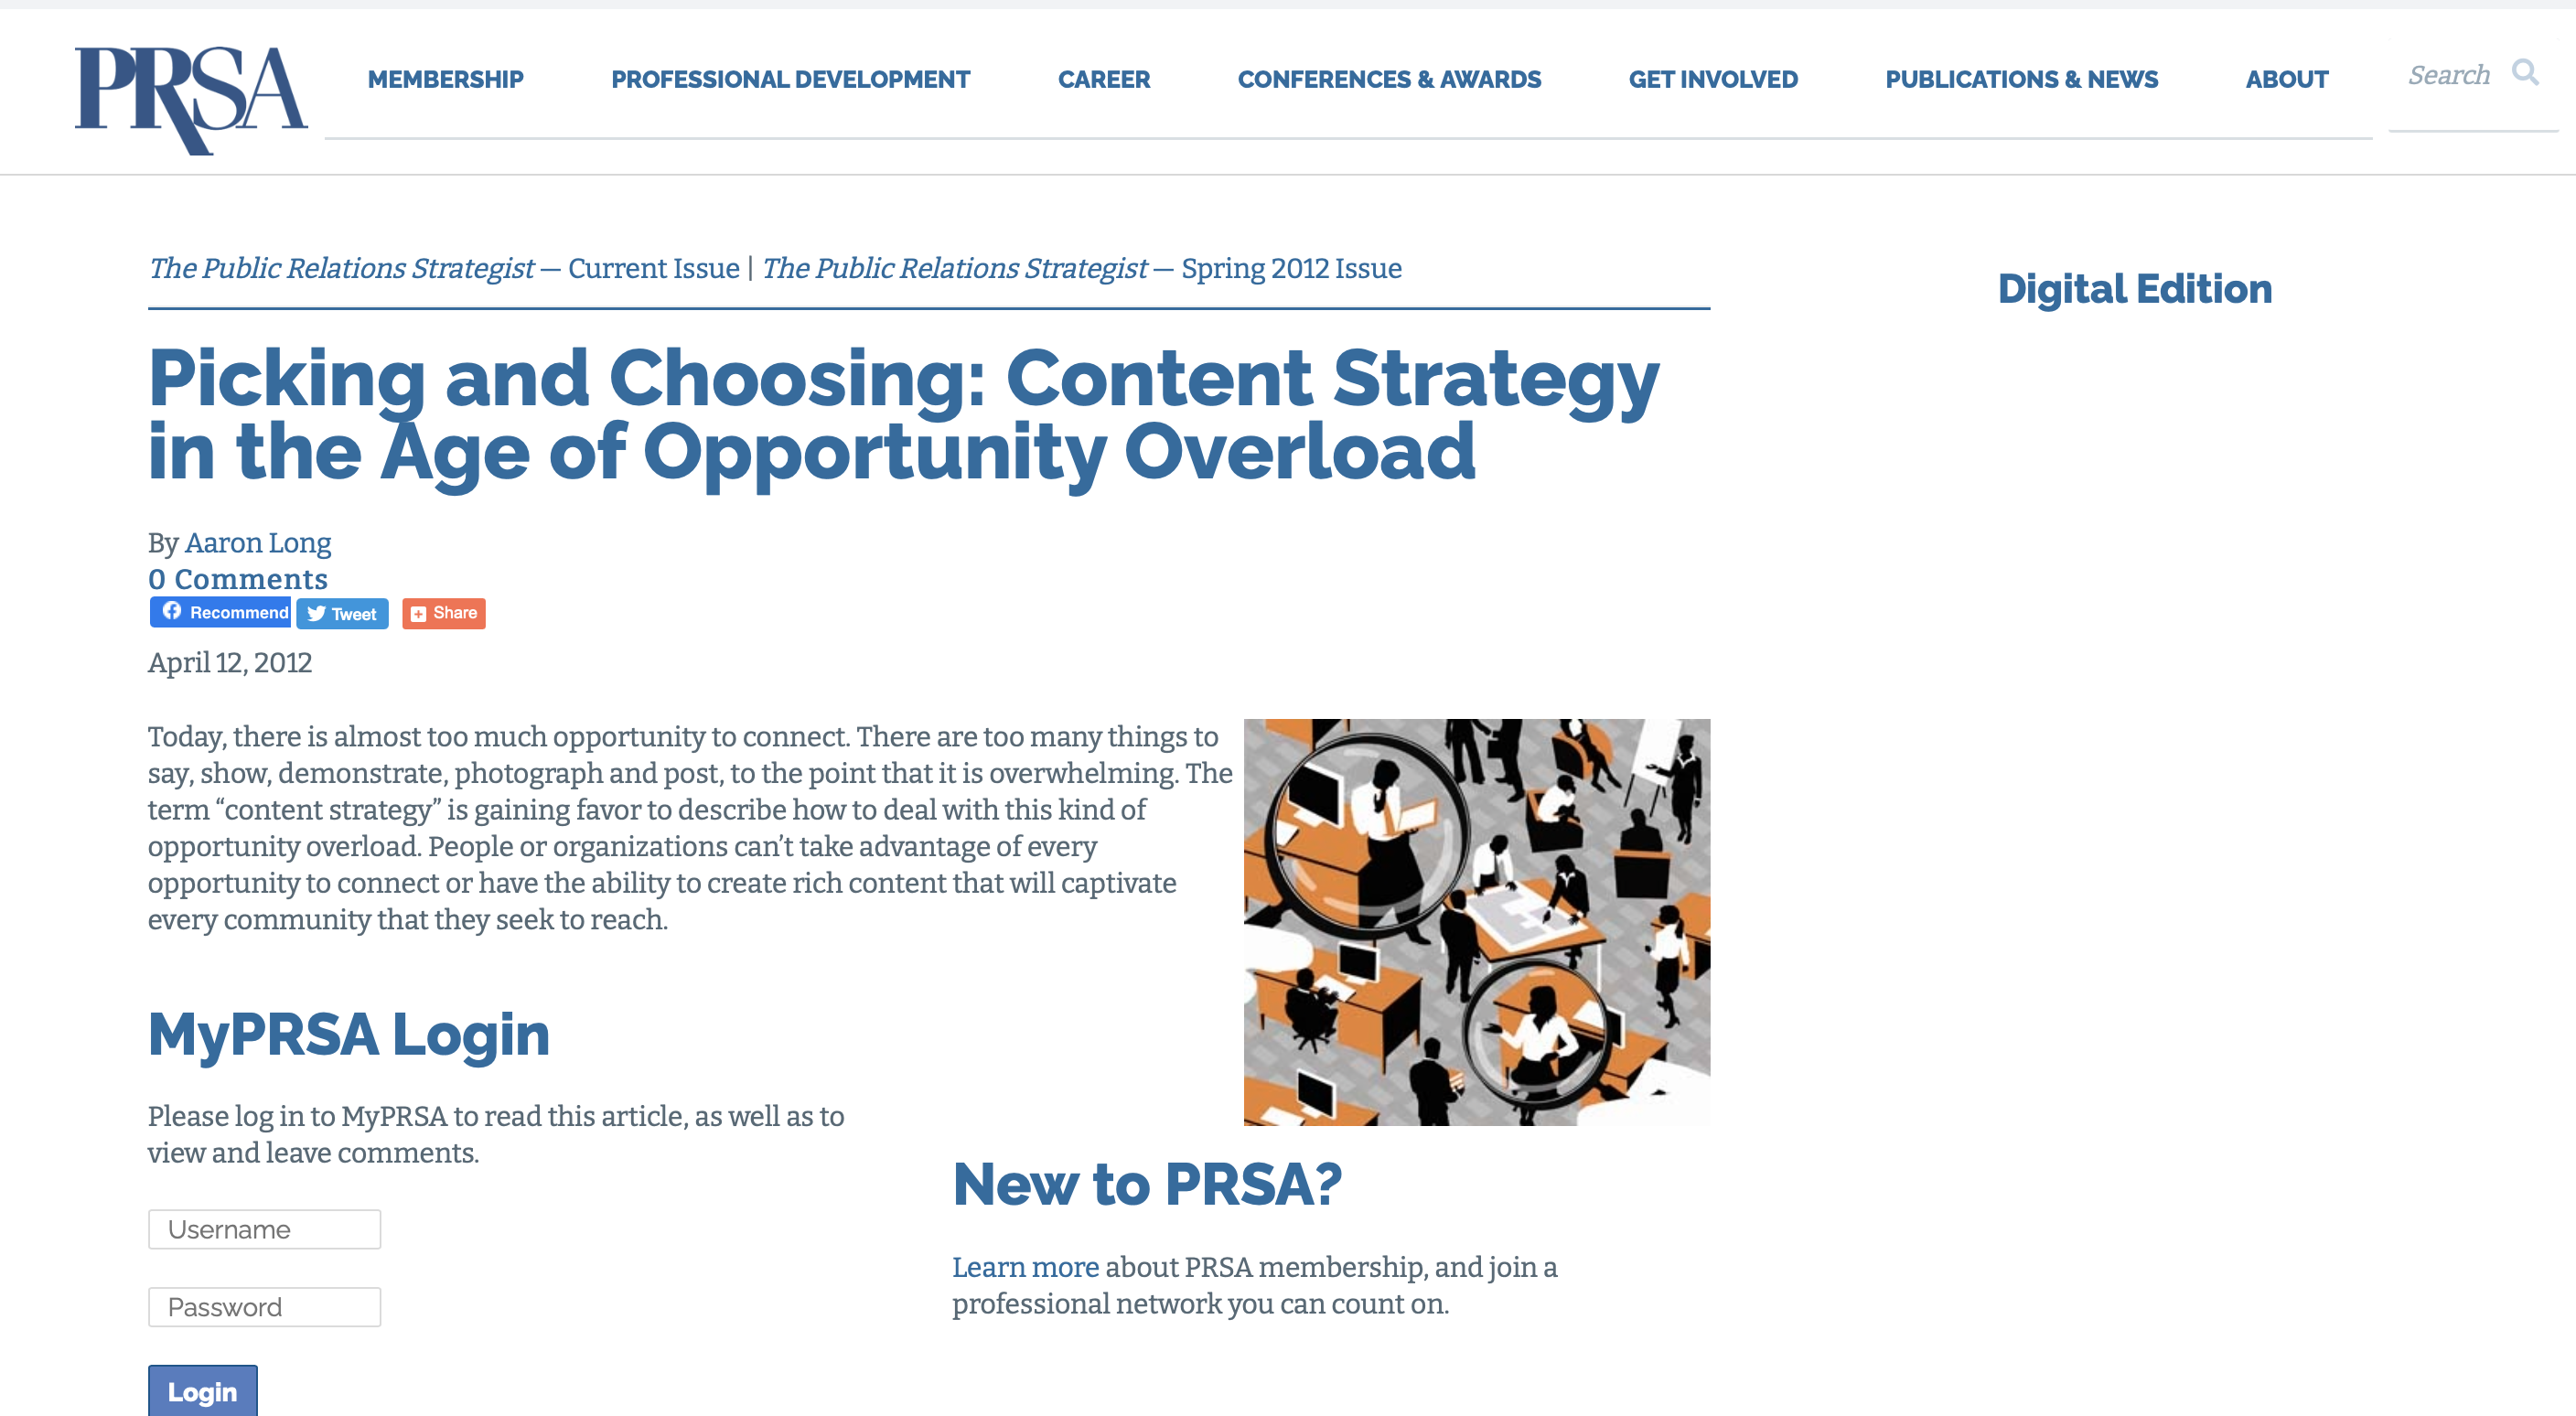 Picking and Choosing: Content Strategy in the Age of Opportunity Overload